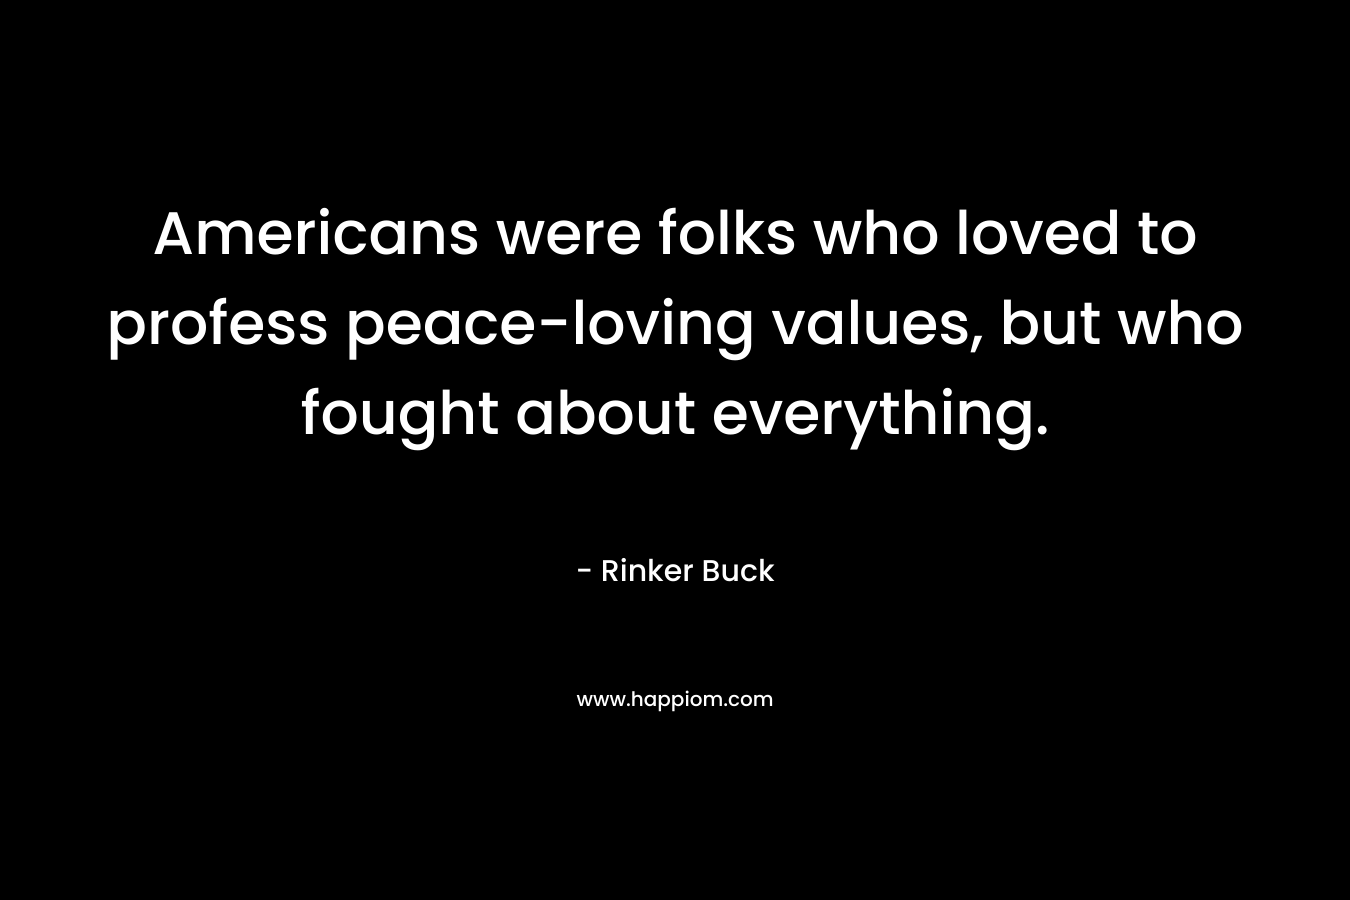 Americans were folks who loved to profess peace-loving values, but who fought about everything.